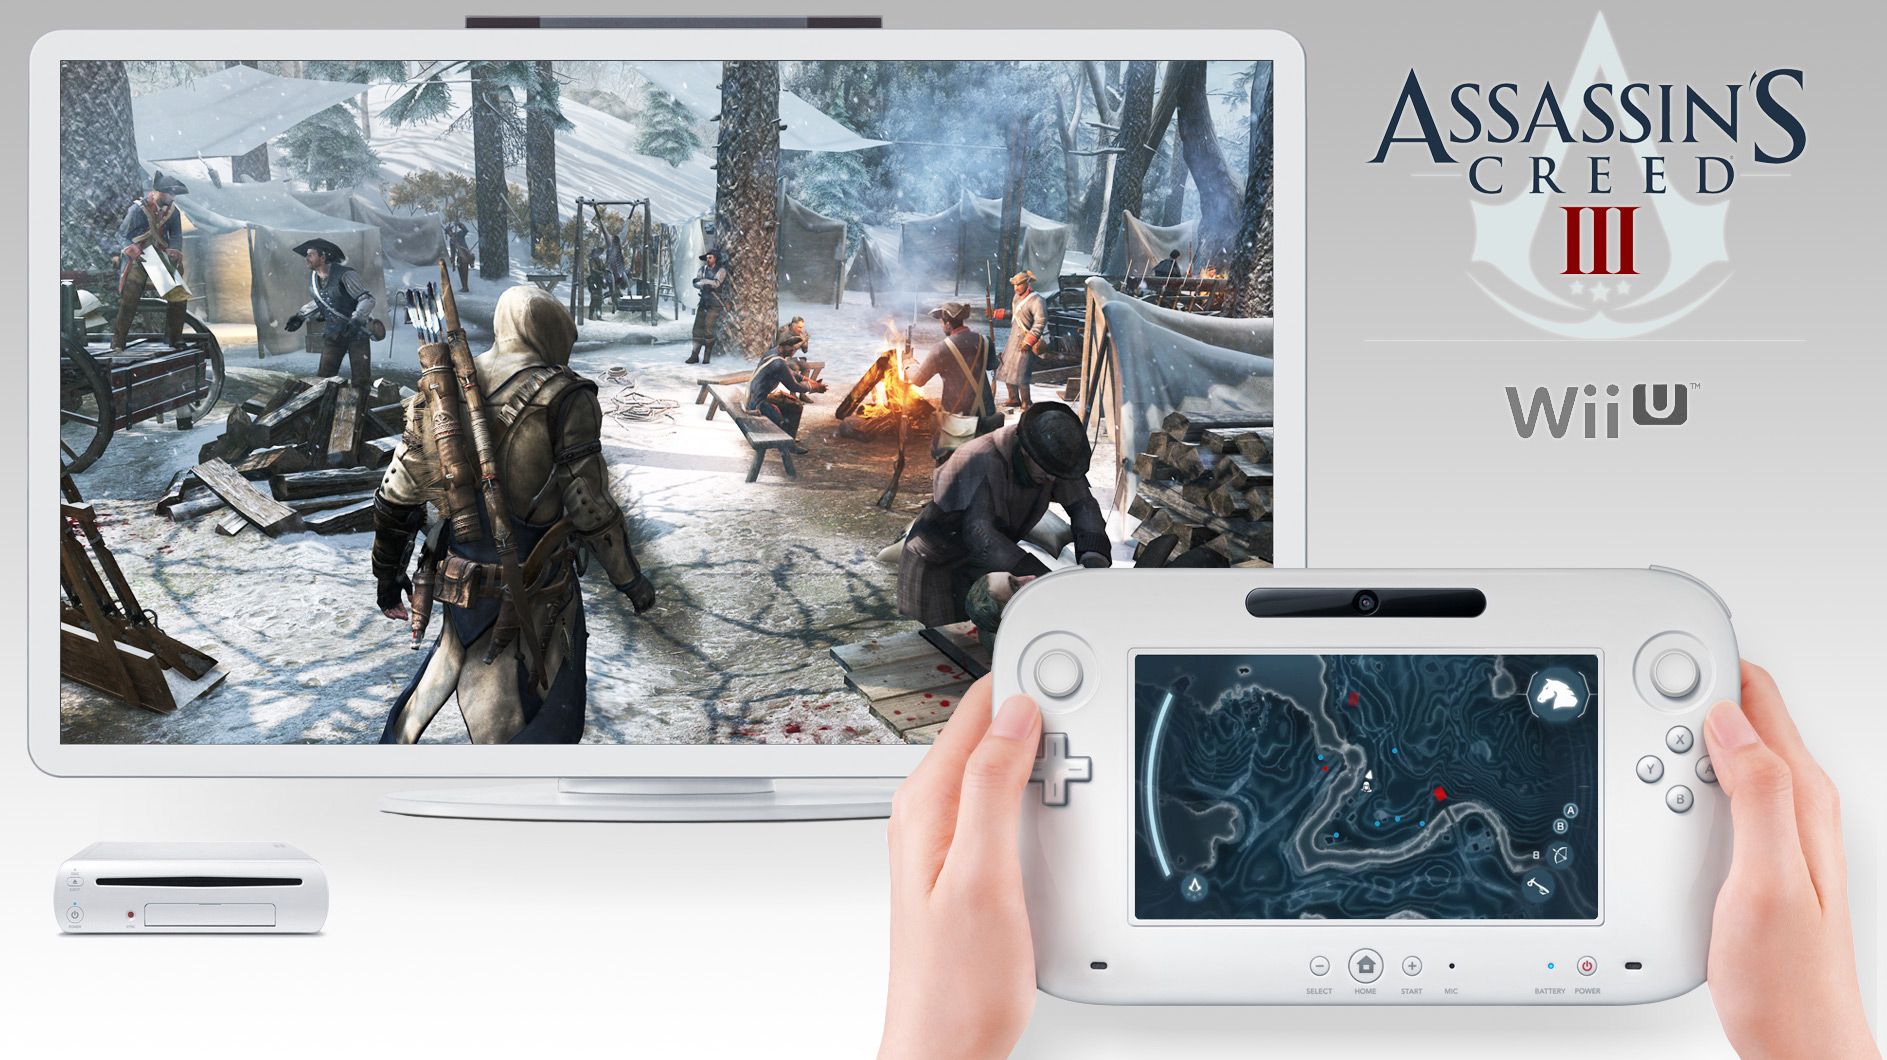 wii assassin creed 3